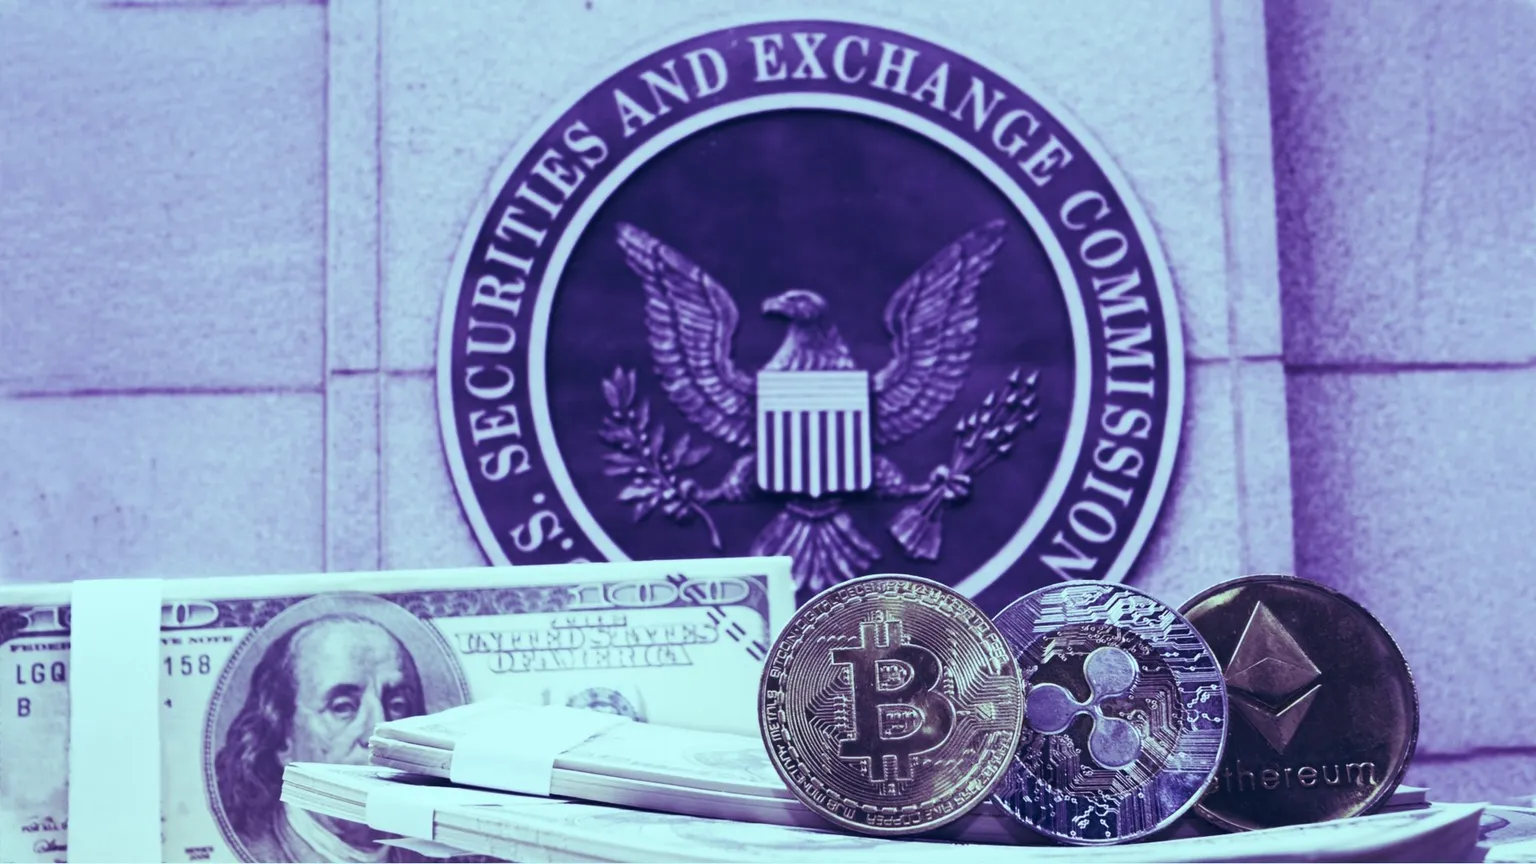 The US Securities and Exchange Commission is tough on crypto. Image: Shutterstock